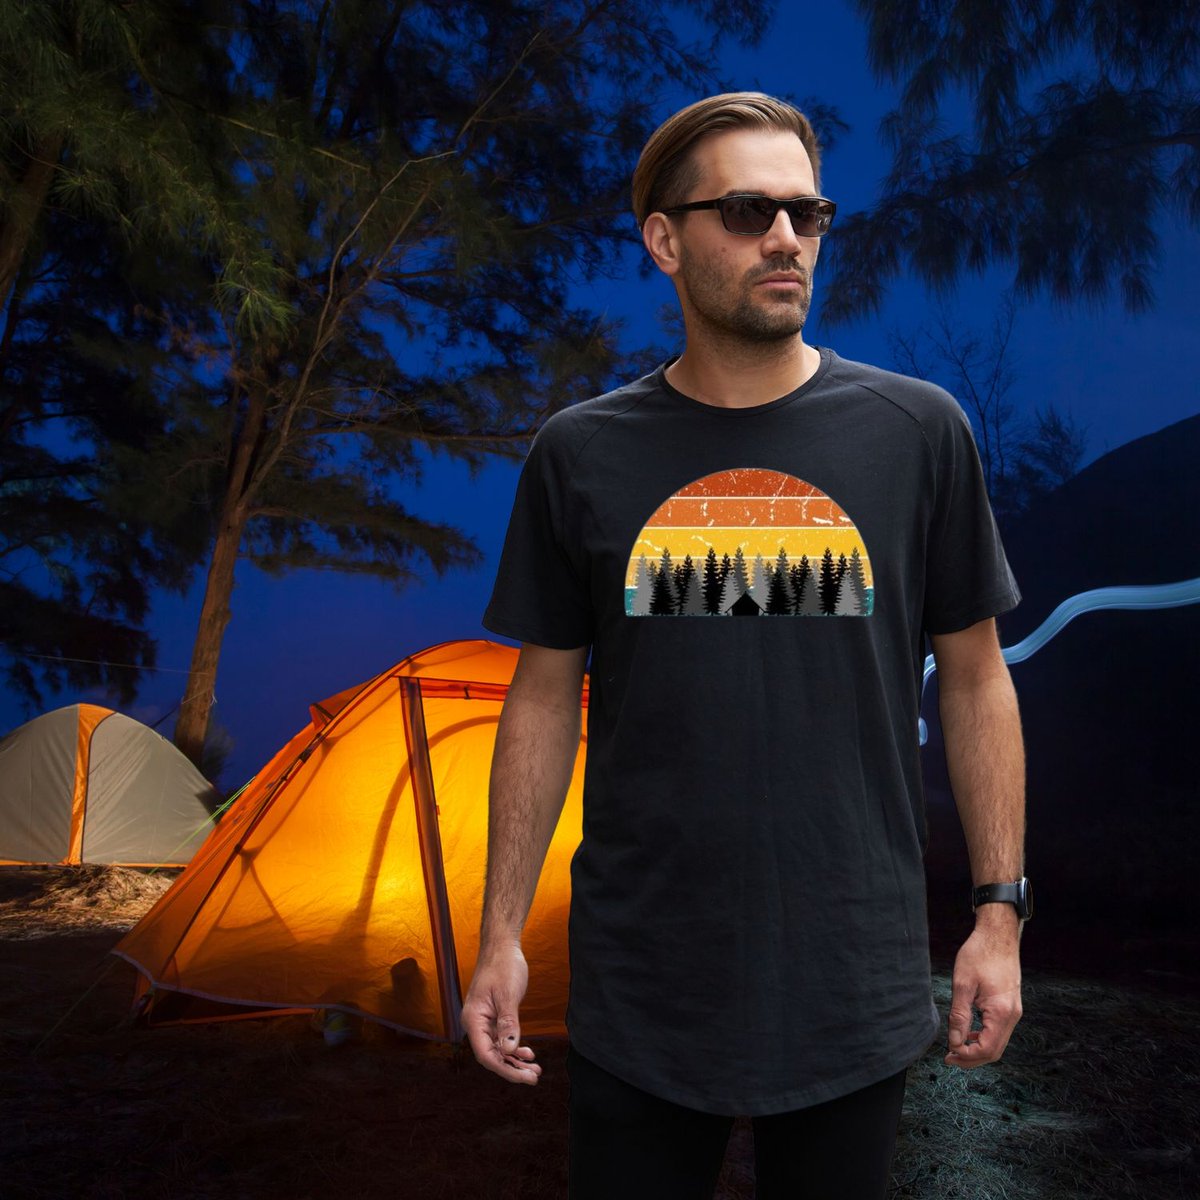 This retro vibe sunset #camping tshirt is in the May sale with 20%off. 
#giftideas #EtsySeller